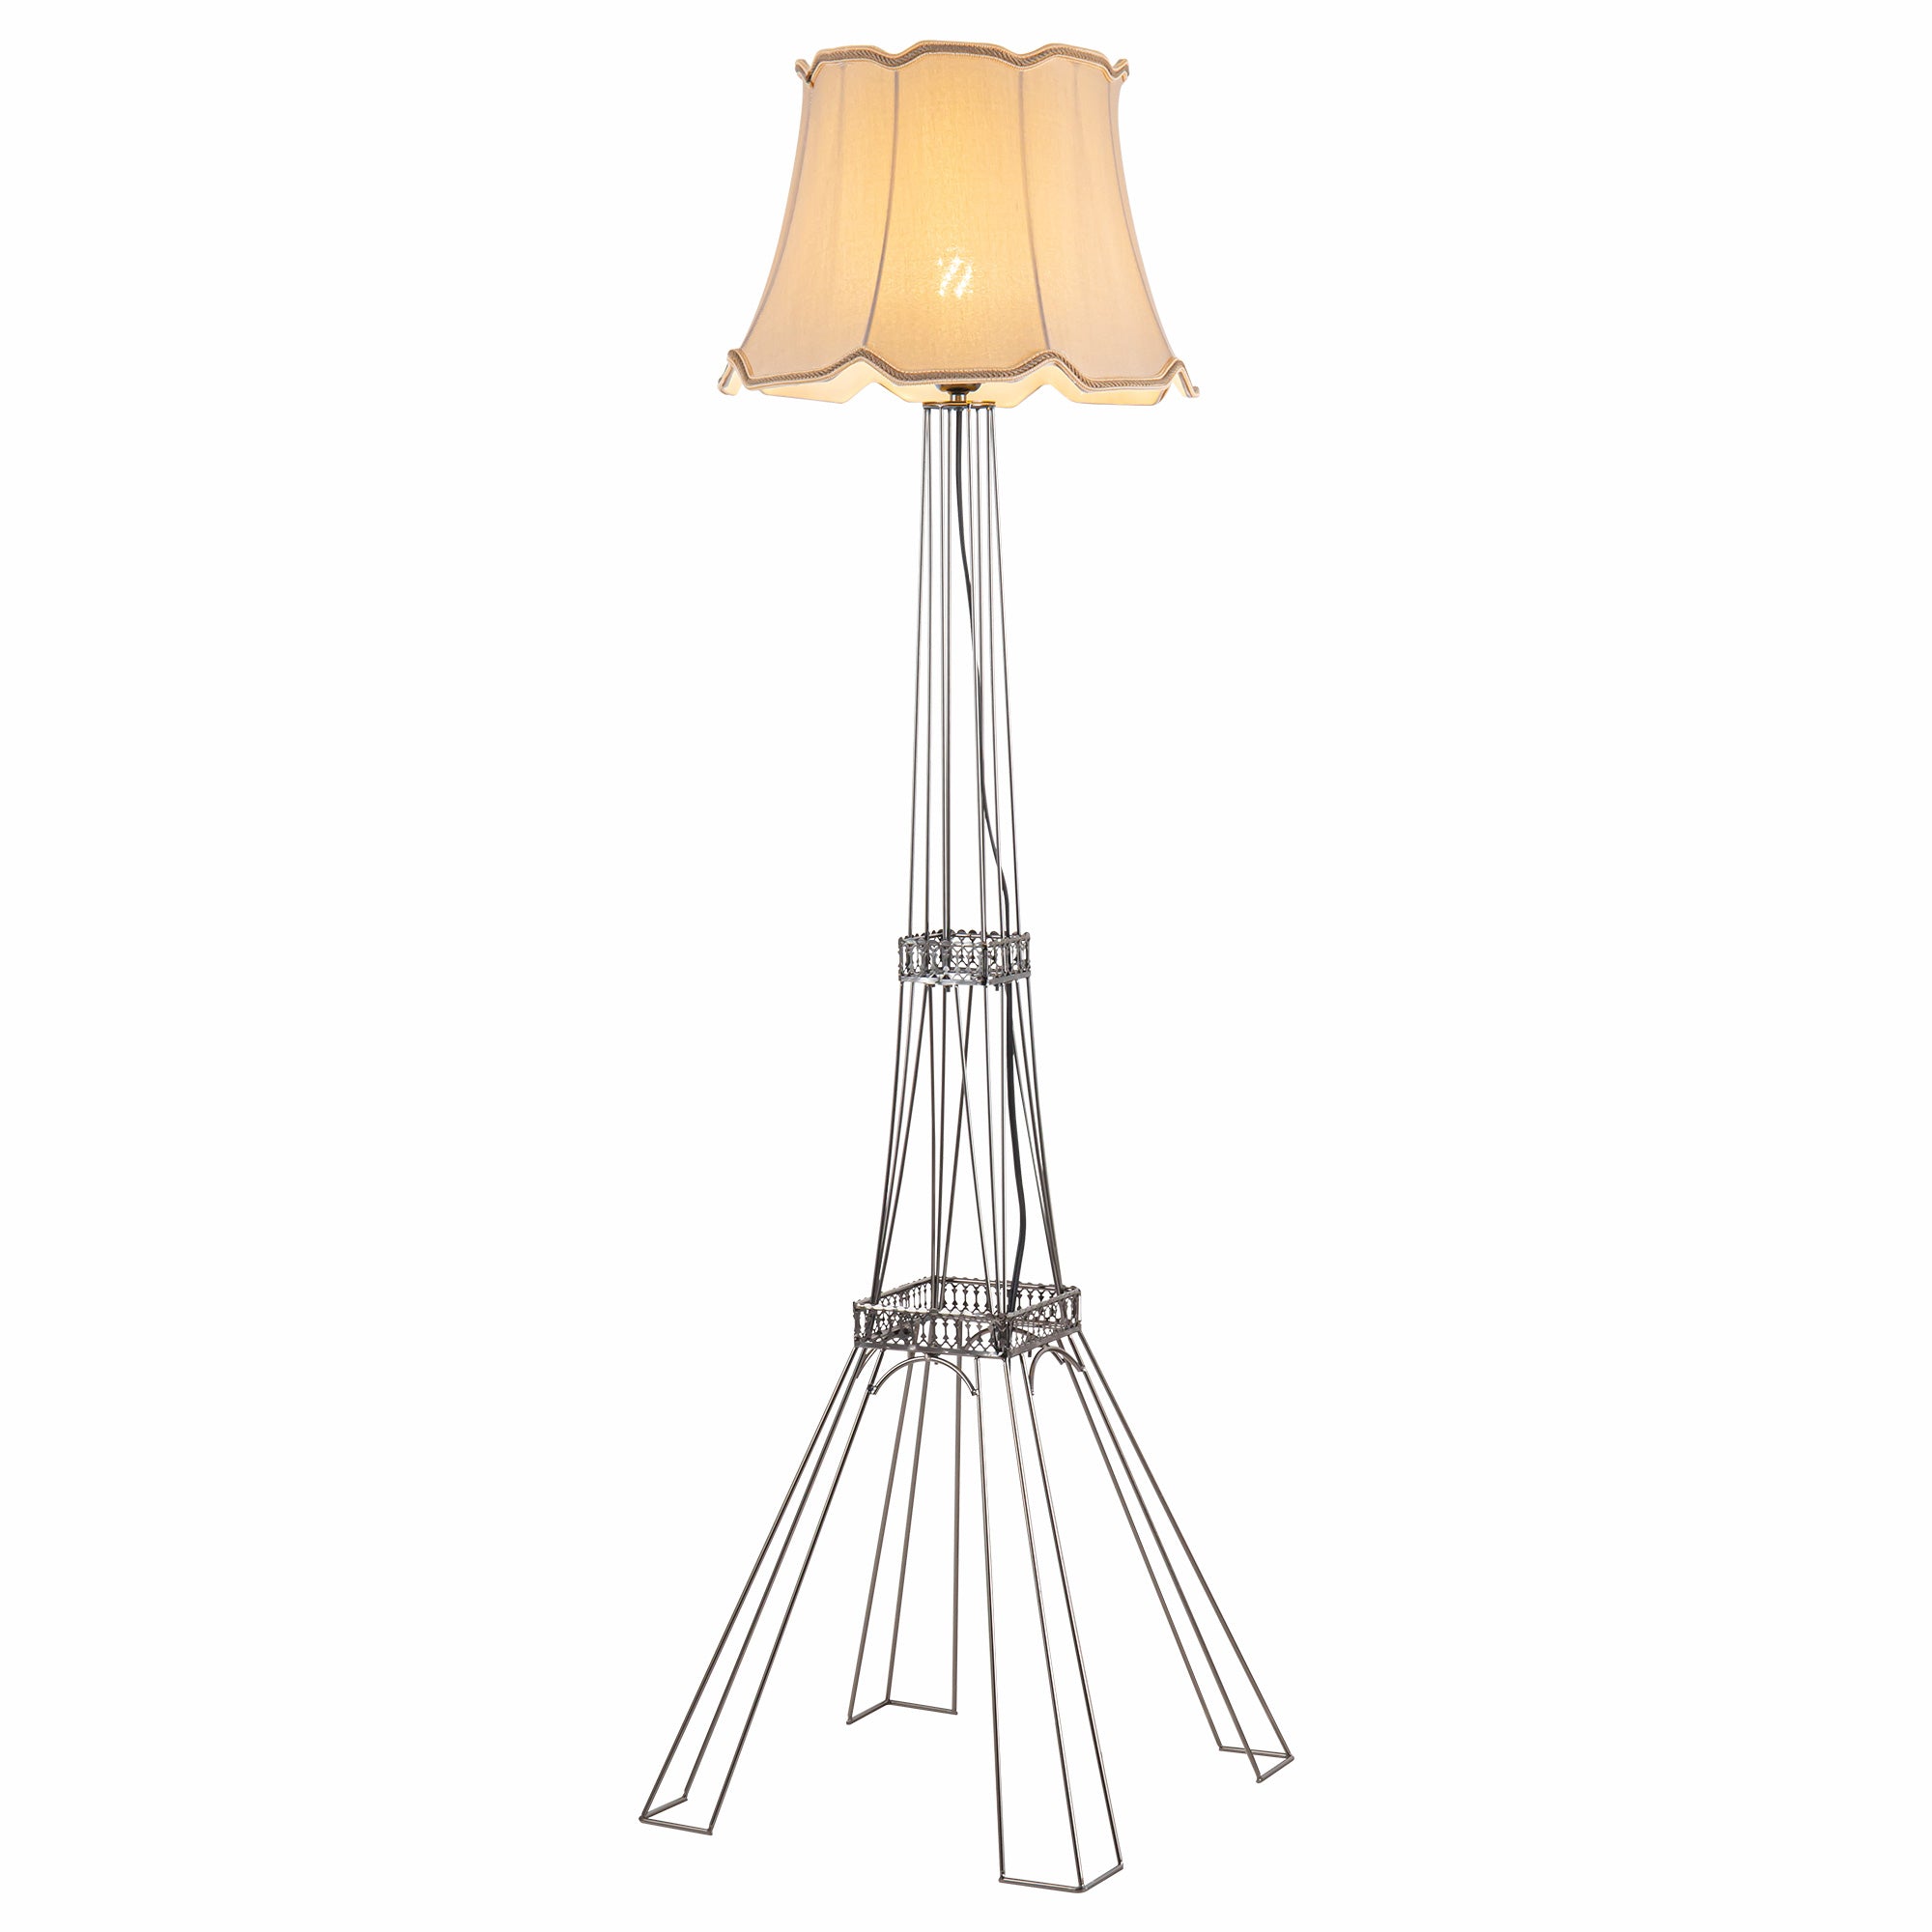 56" Brass LED Light Changing Floor Lamp With Beige Bell Shade